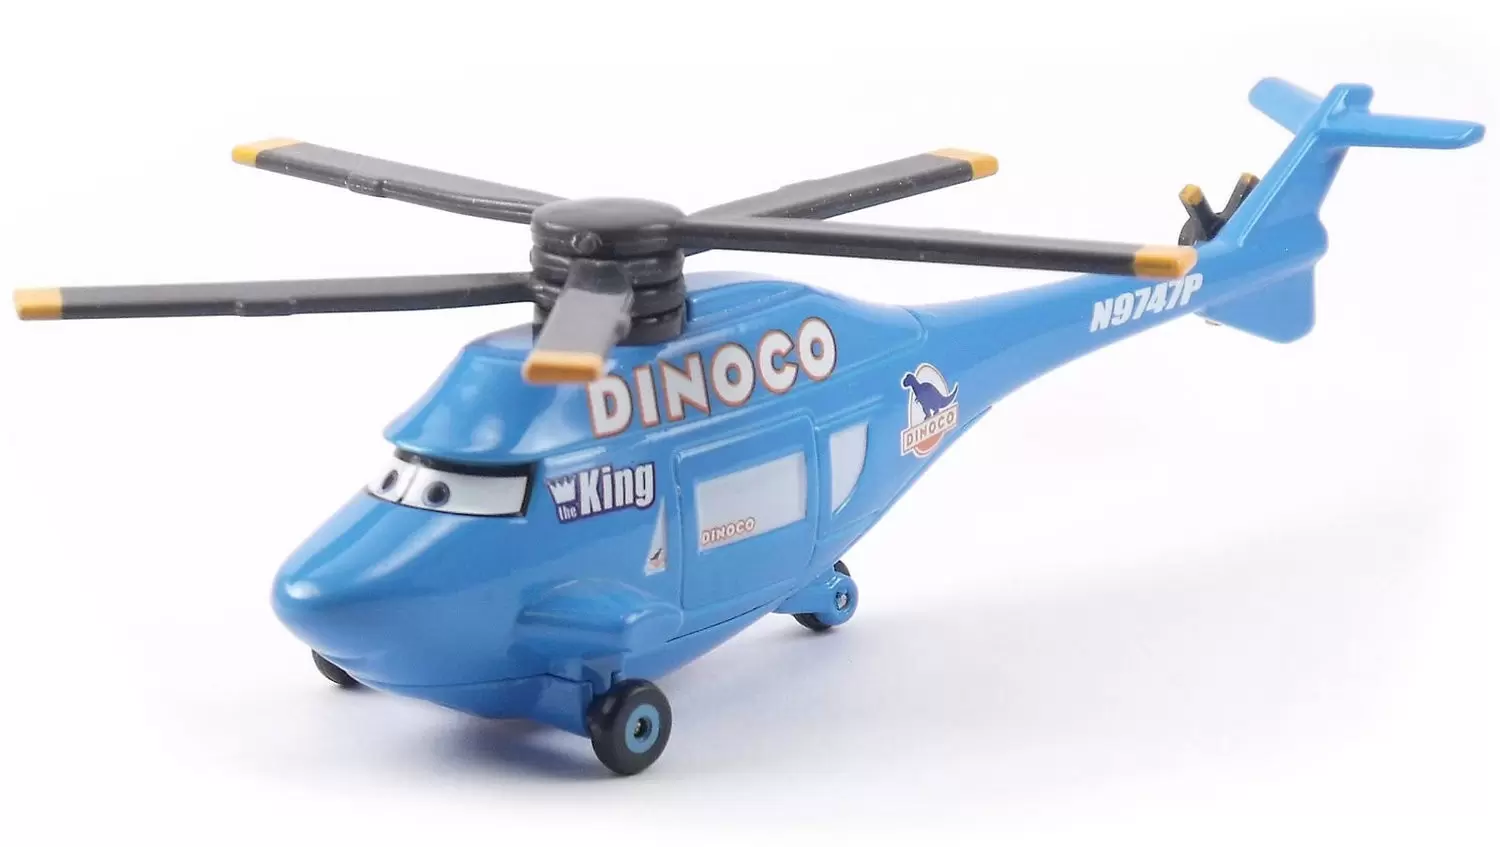 Cars 1 - Dinoco Helicopter (Megasize)